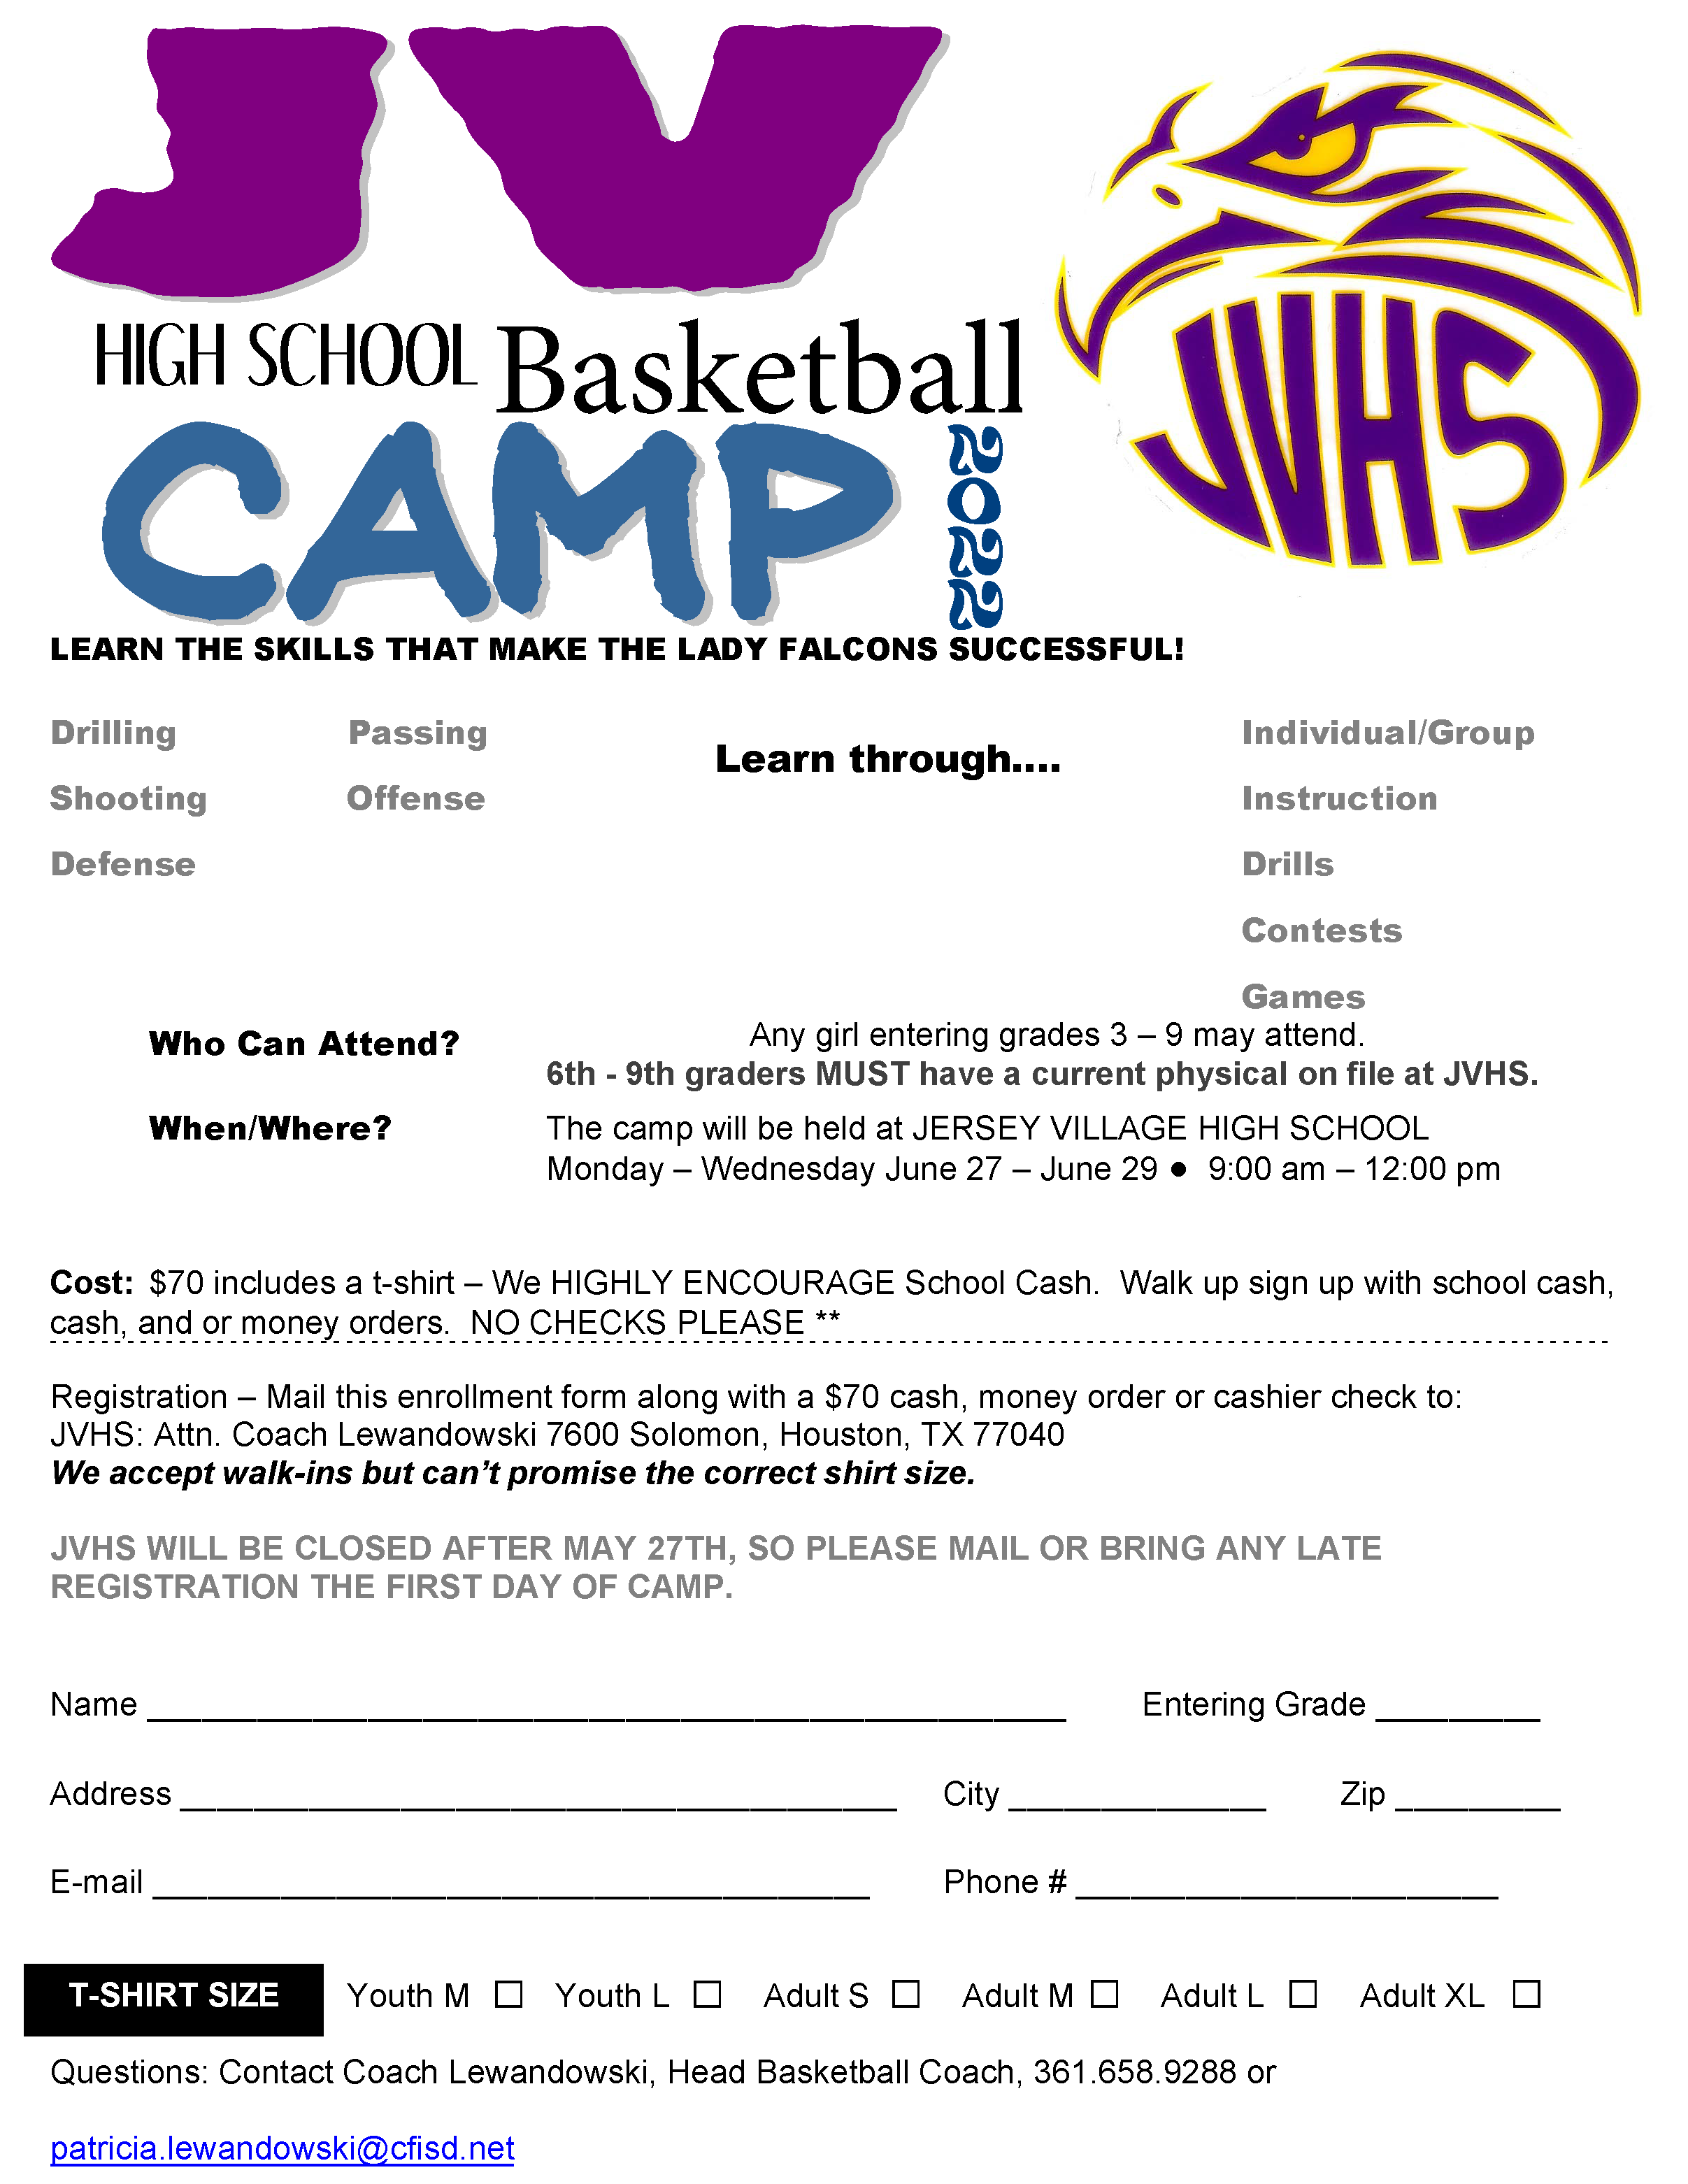 JVHS Girls Basketball Camp is on June 27-29 9am-12pm